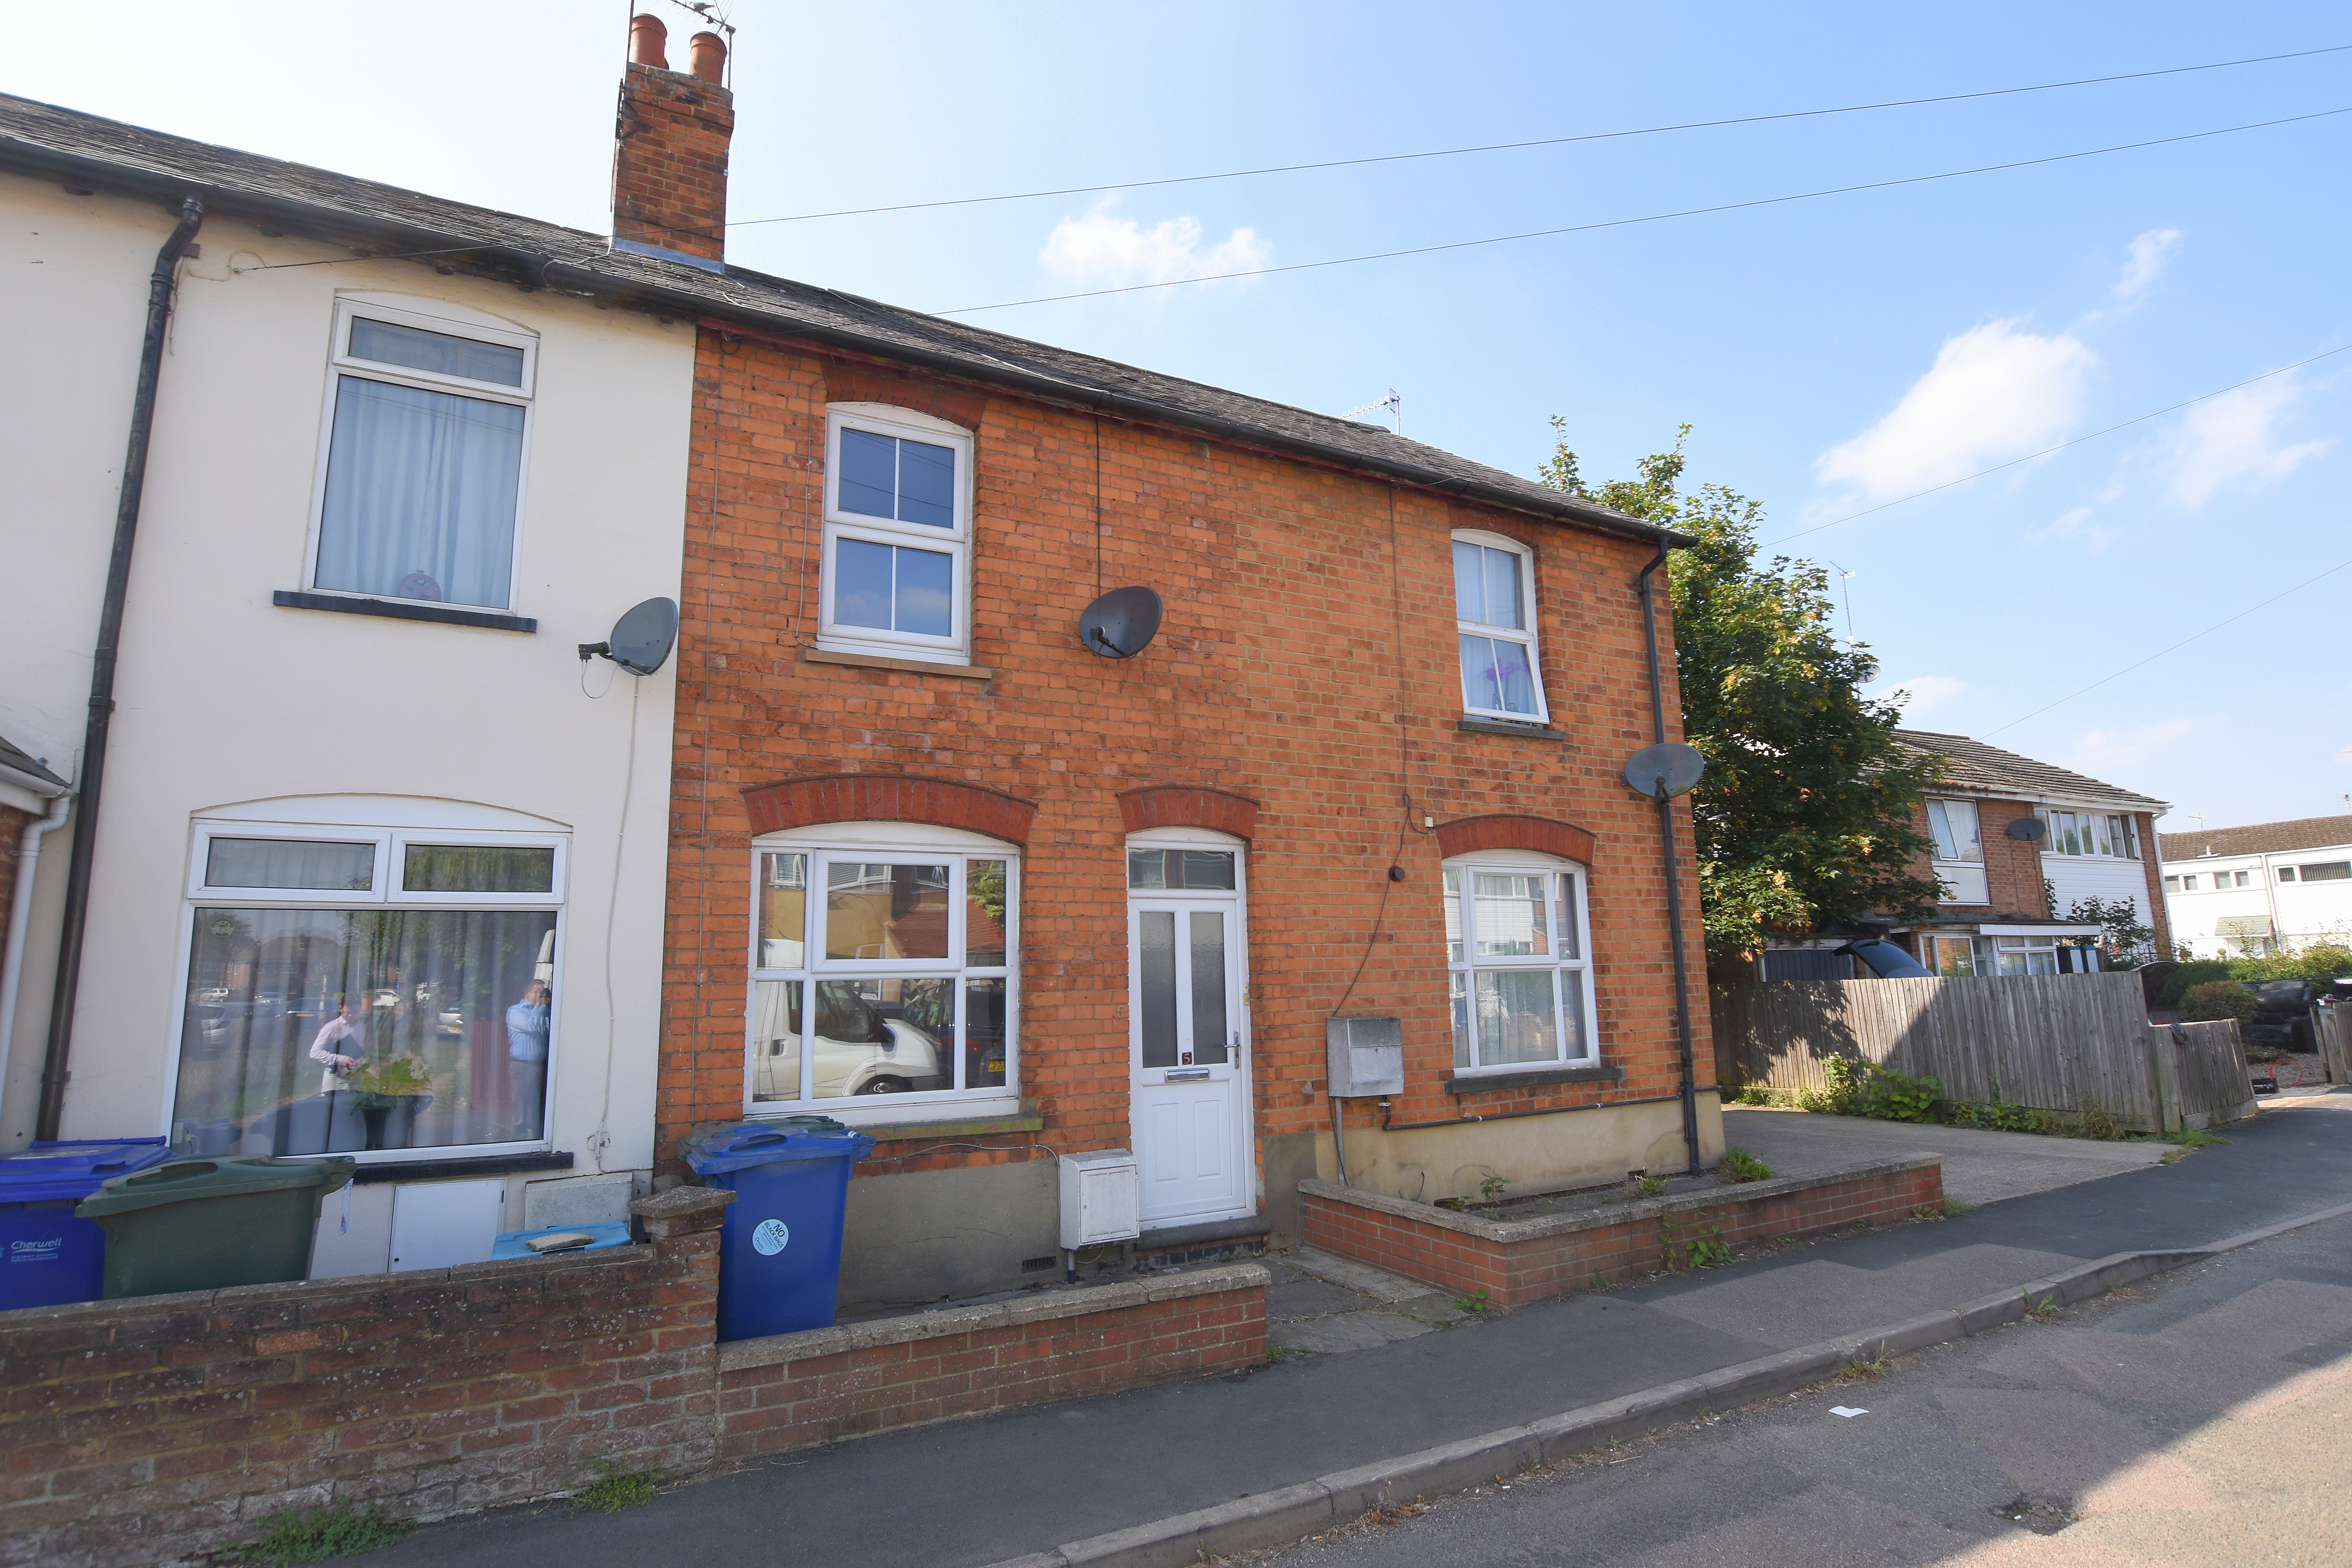 2 bed  for sale in Manor Road, Banbury - Property Image 1